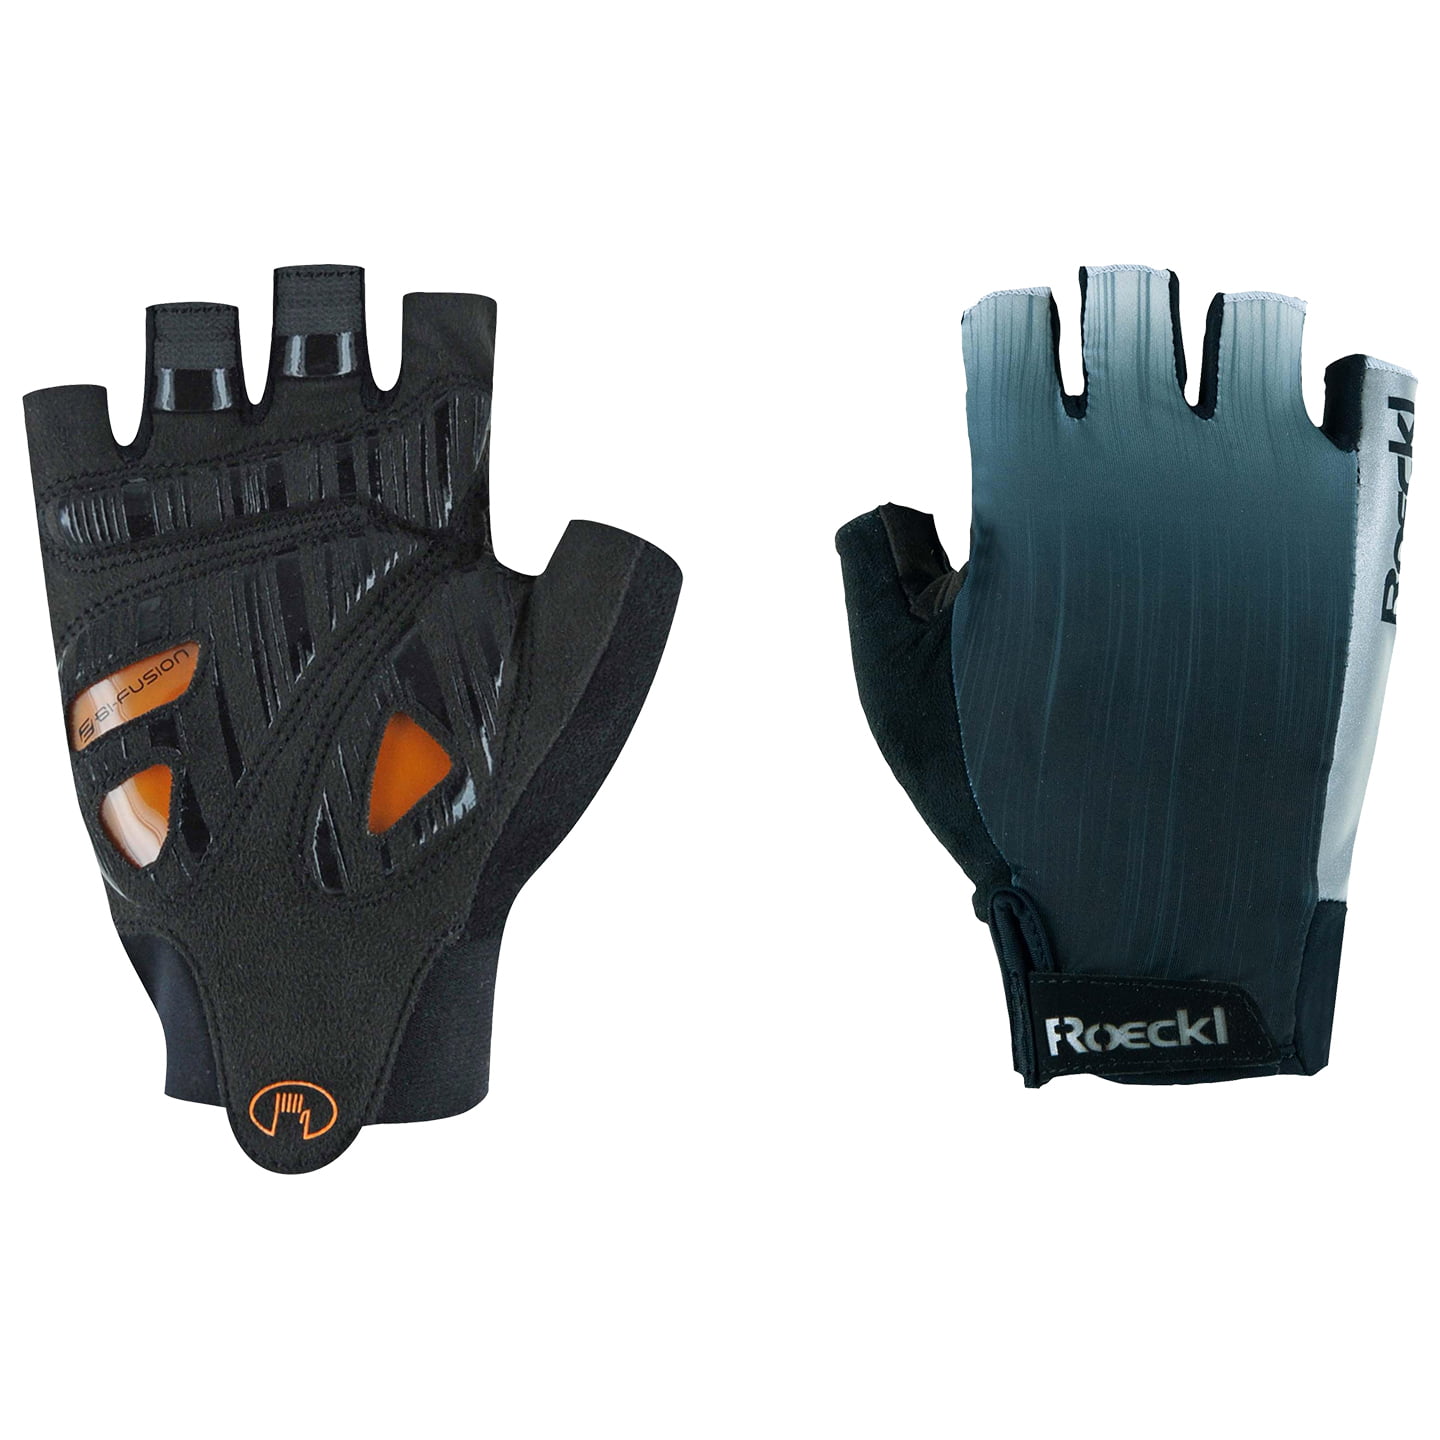 ROECKL Illasi MTB Gloves Cycling Gloves, for men, size 8,5, MTB gloves, Cycling apparel